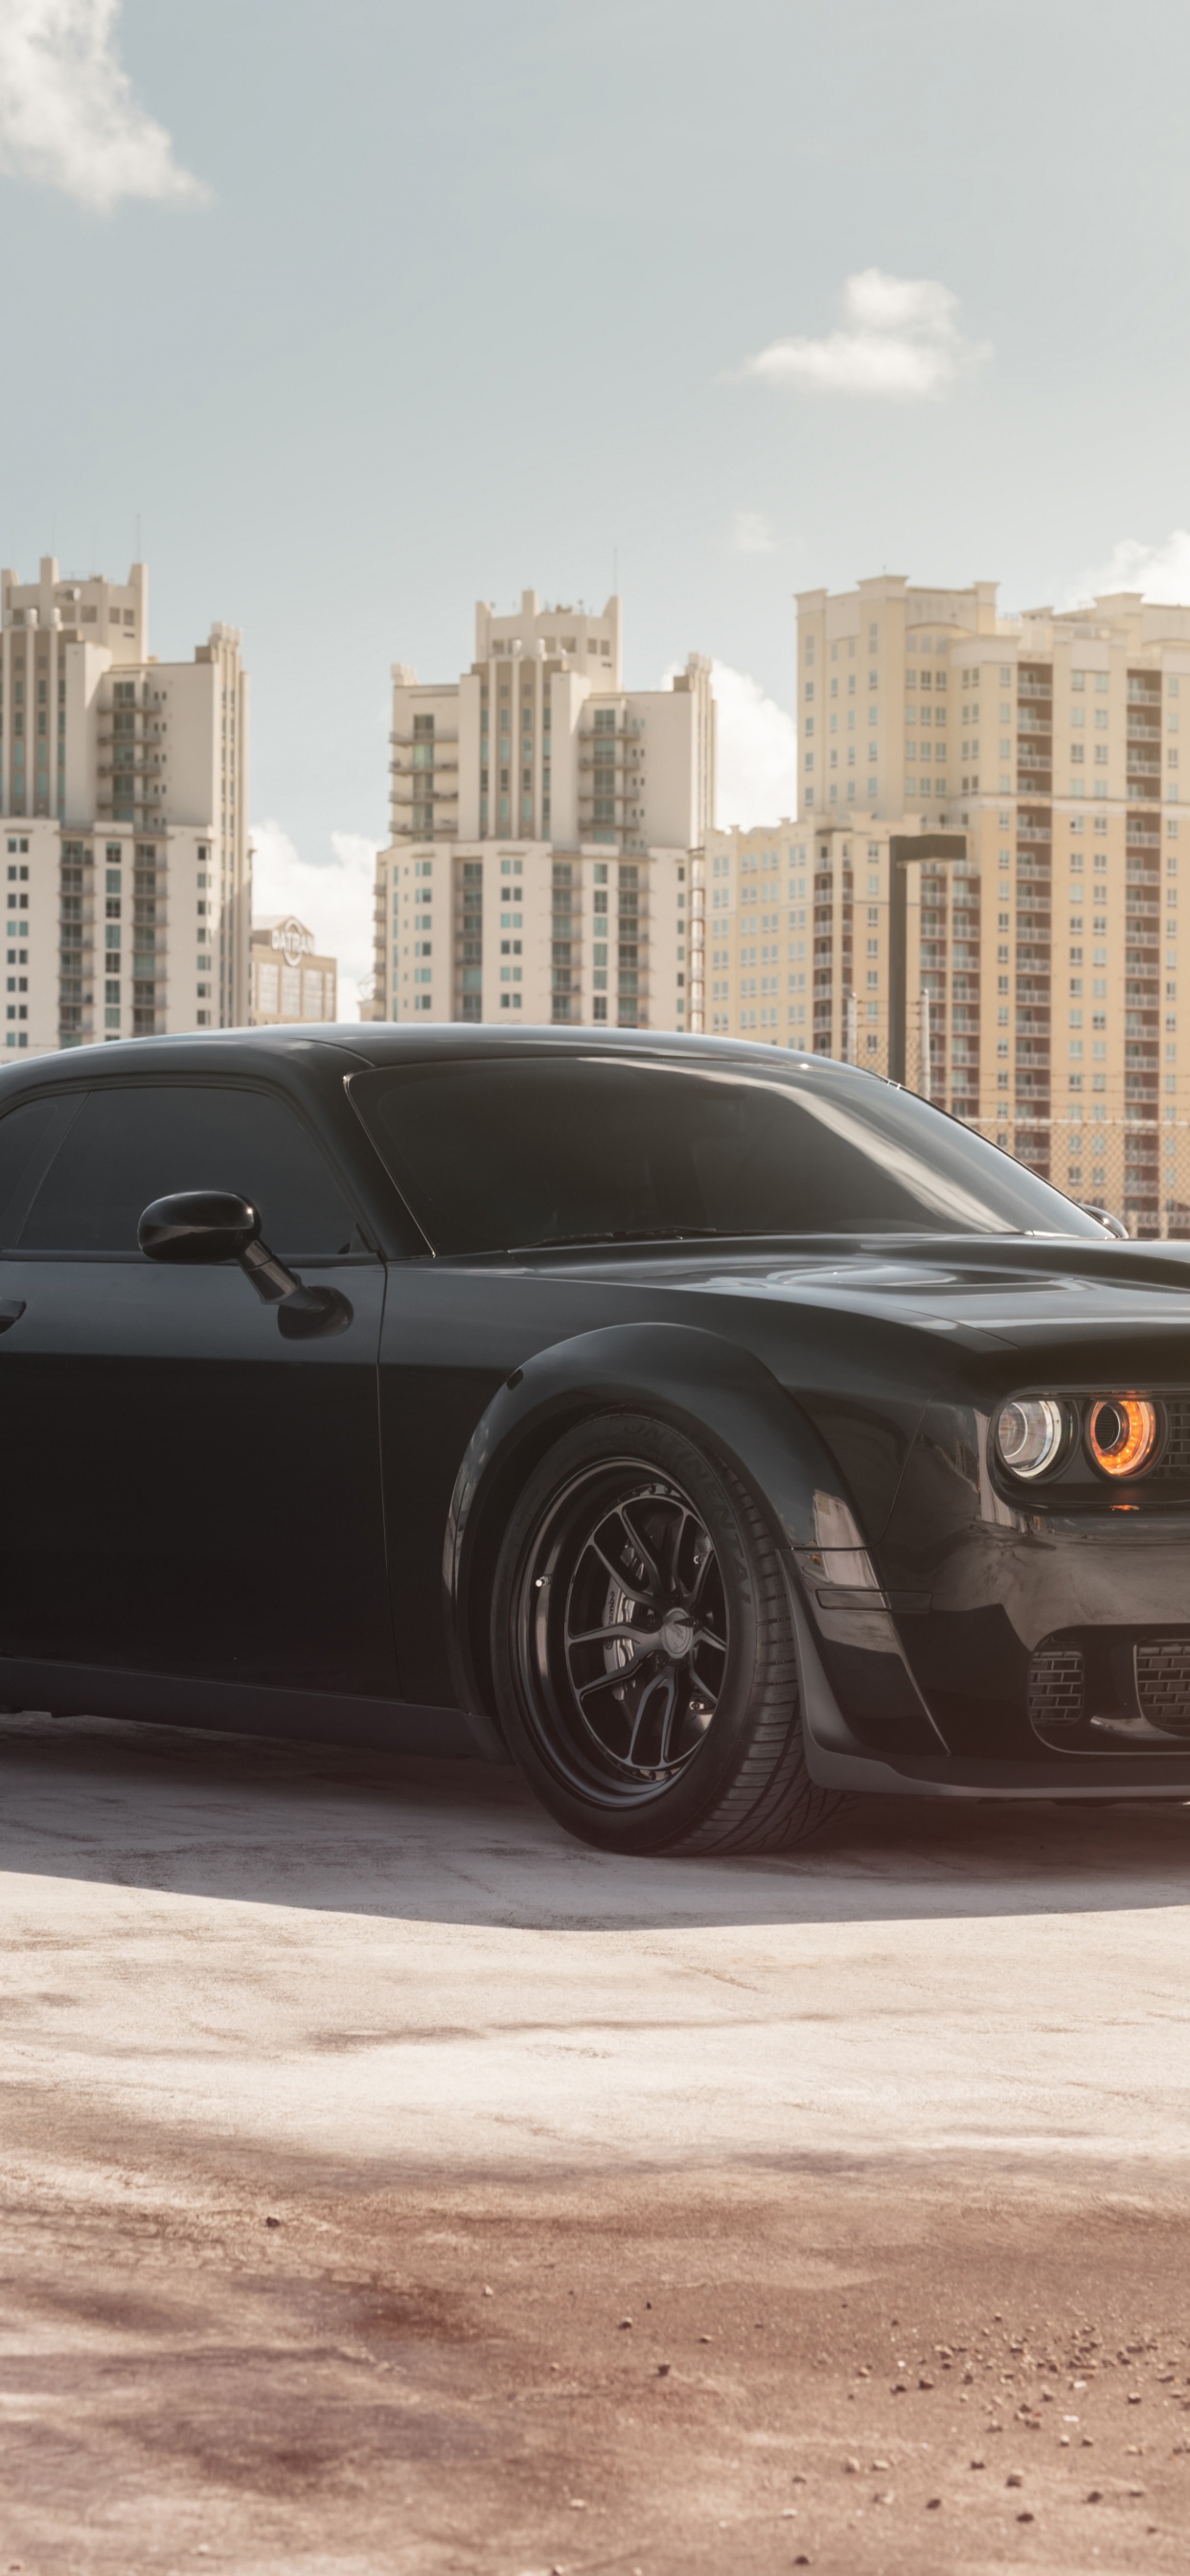 Black Coupe Parked on Gray Concrete Pavement During Daytime. Wallpaper in 1242x2688 Resolution